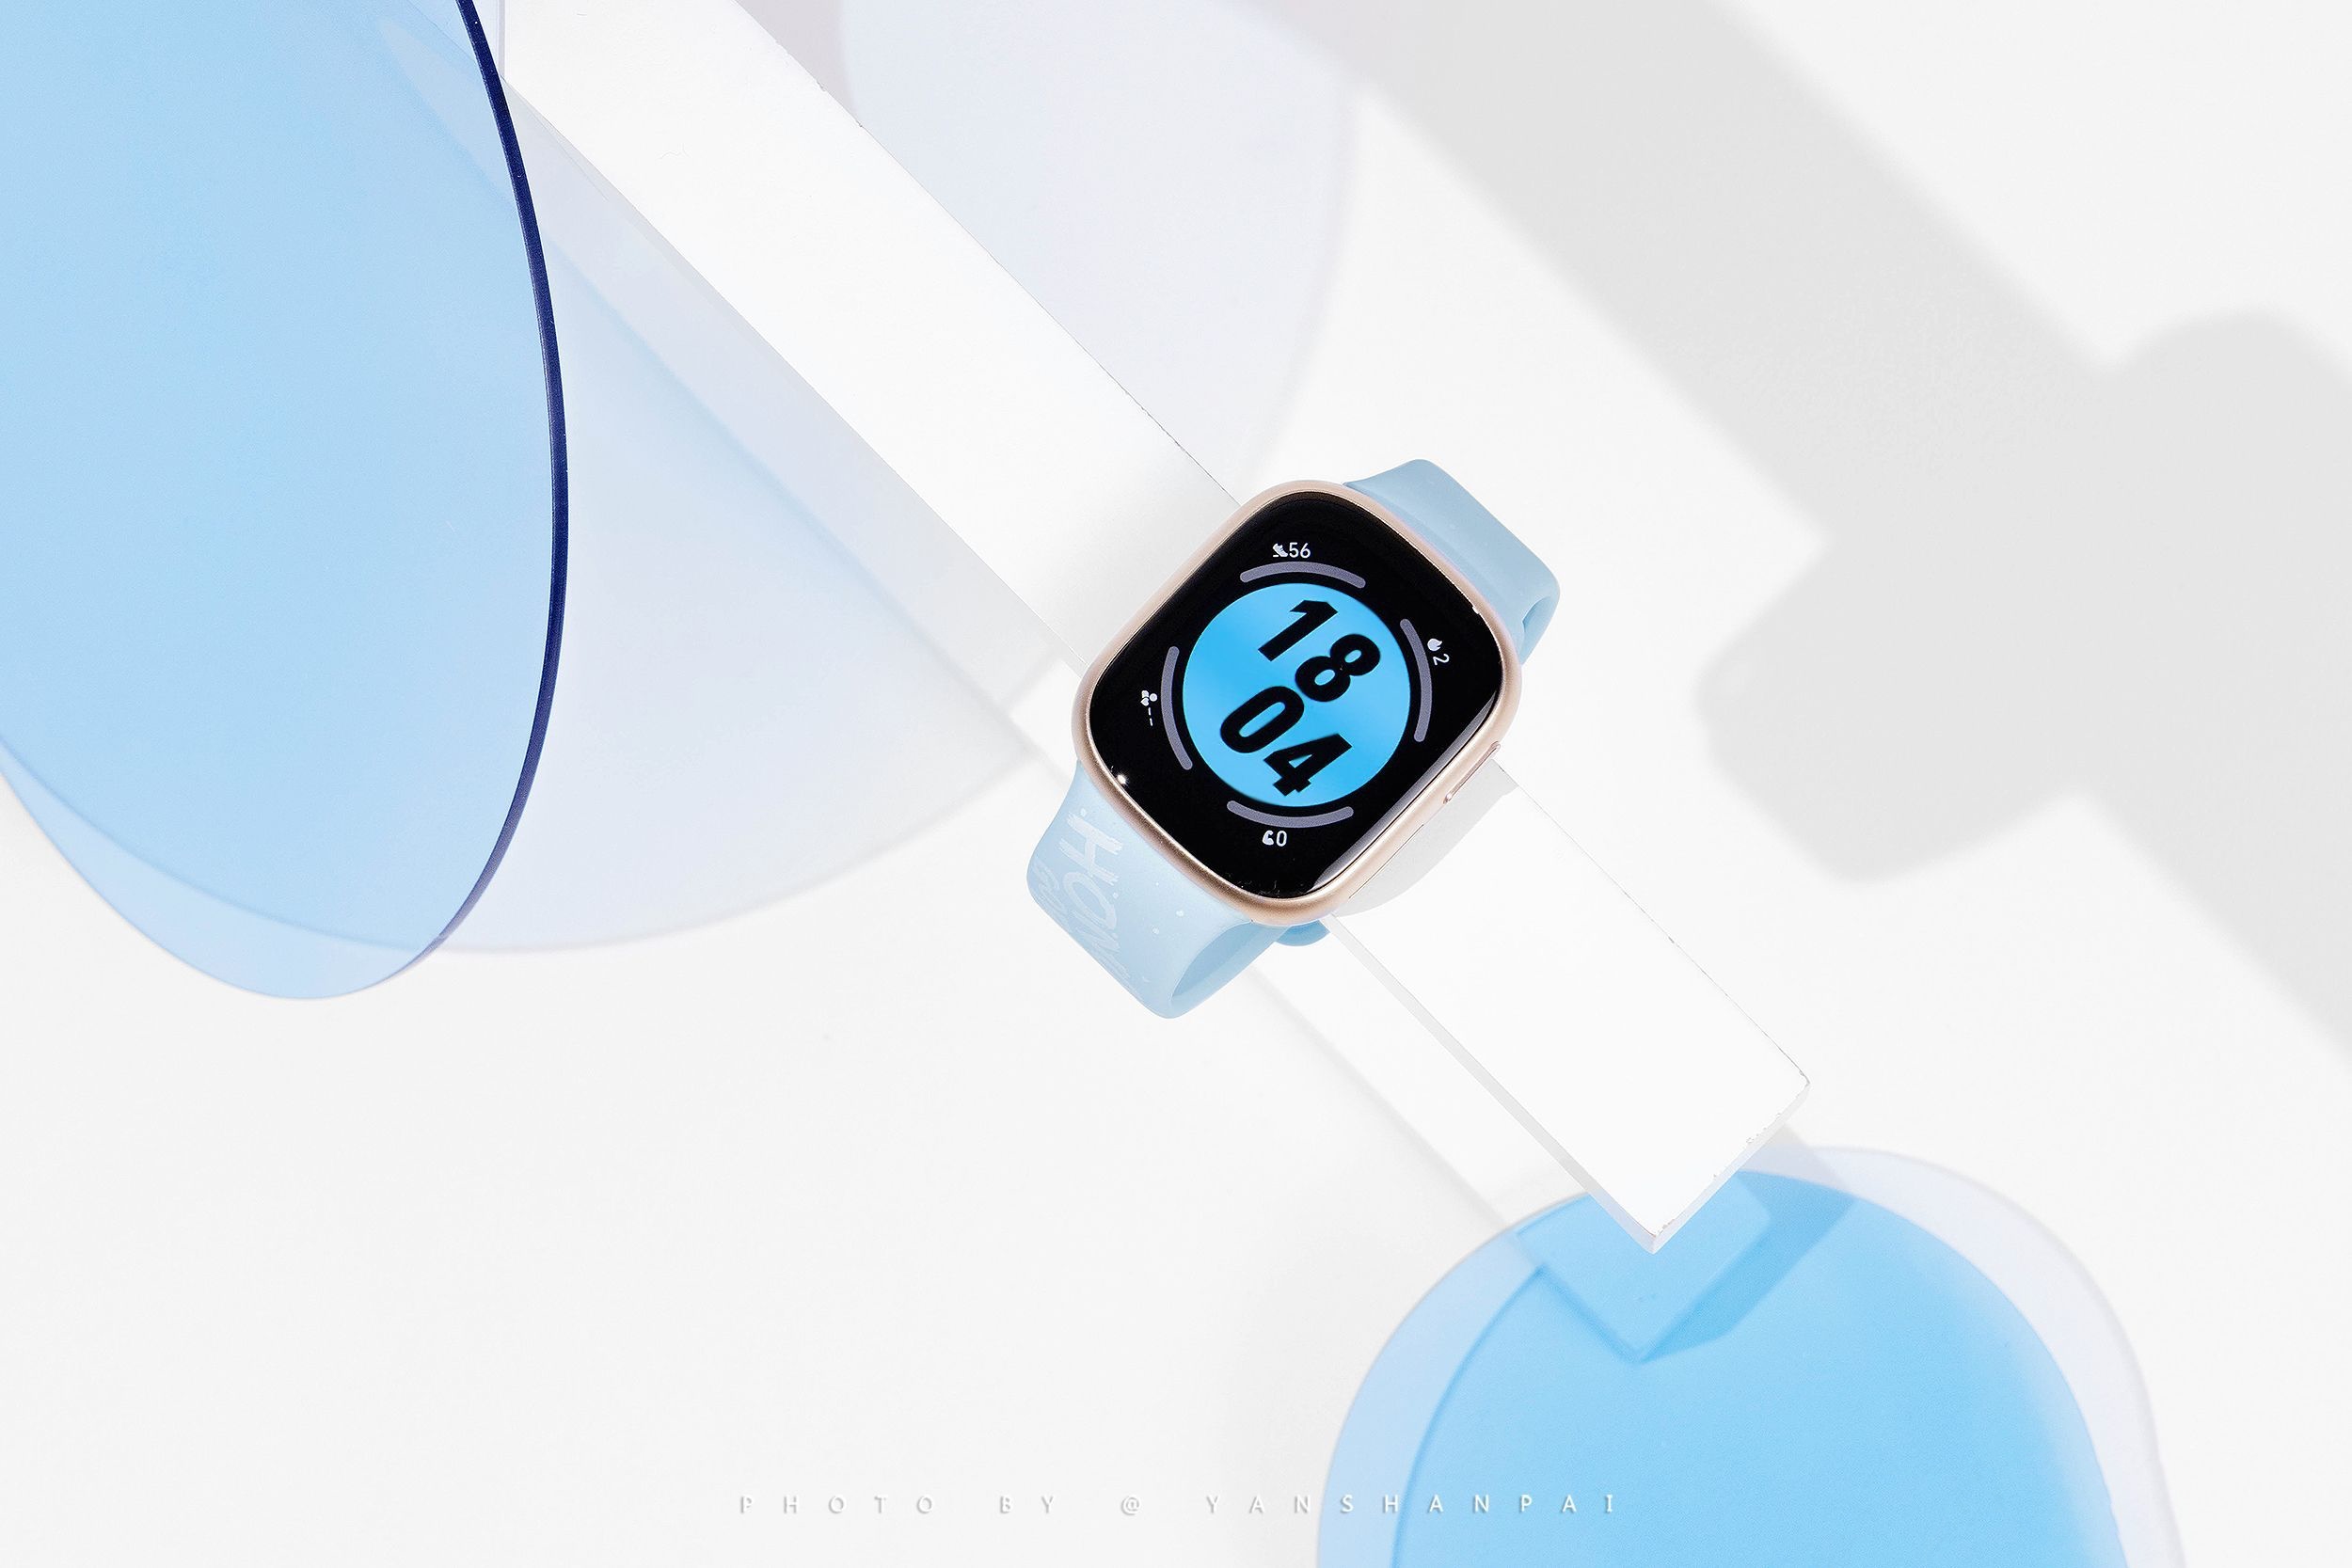 A copy of the Apple Watch: live pictures of the Honor Watch 4 have surfaced online